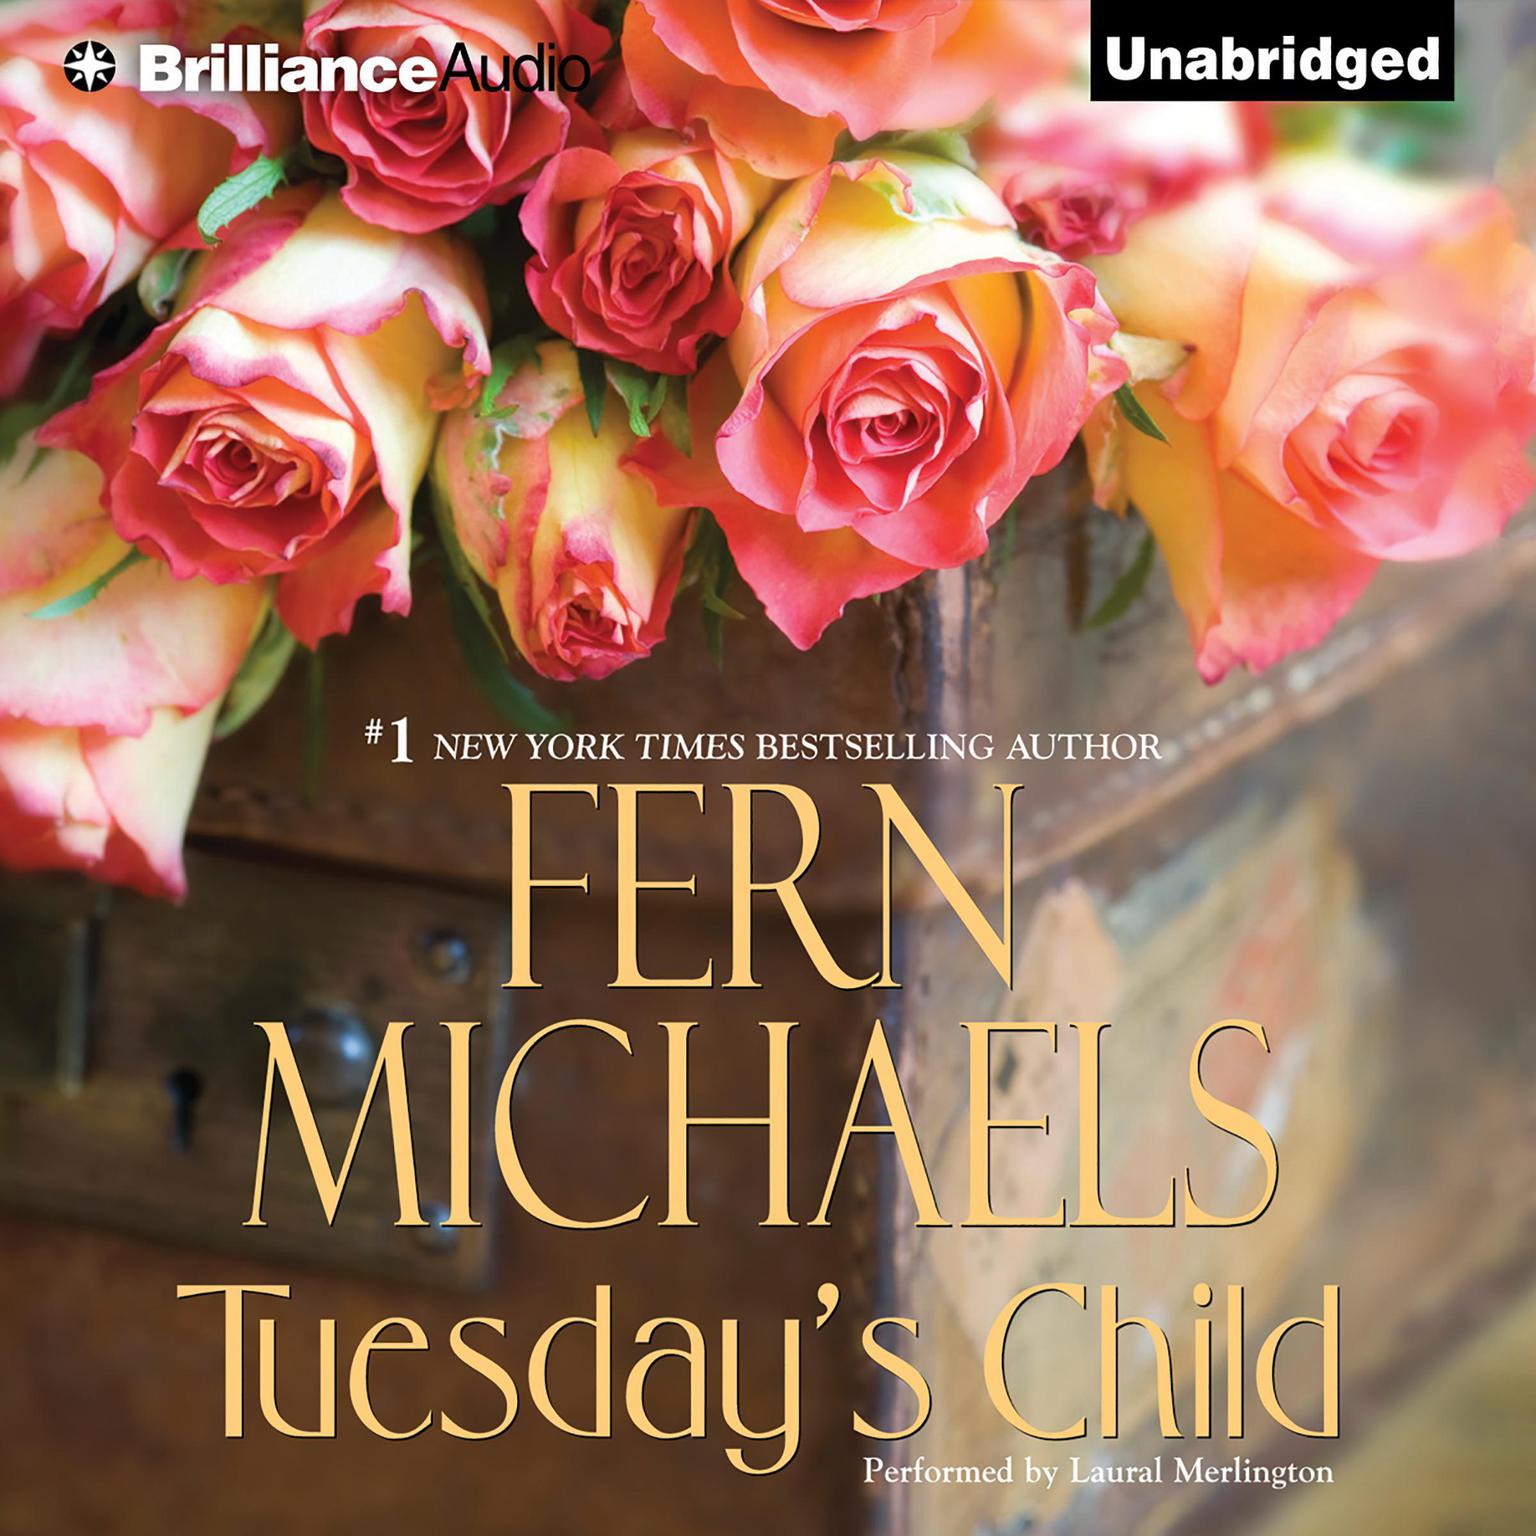 Tuesdays Child Audiobook, by Fern Michaels